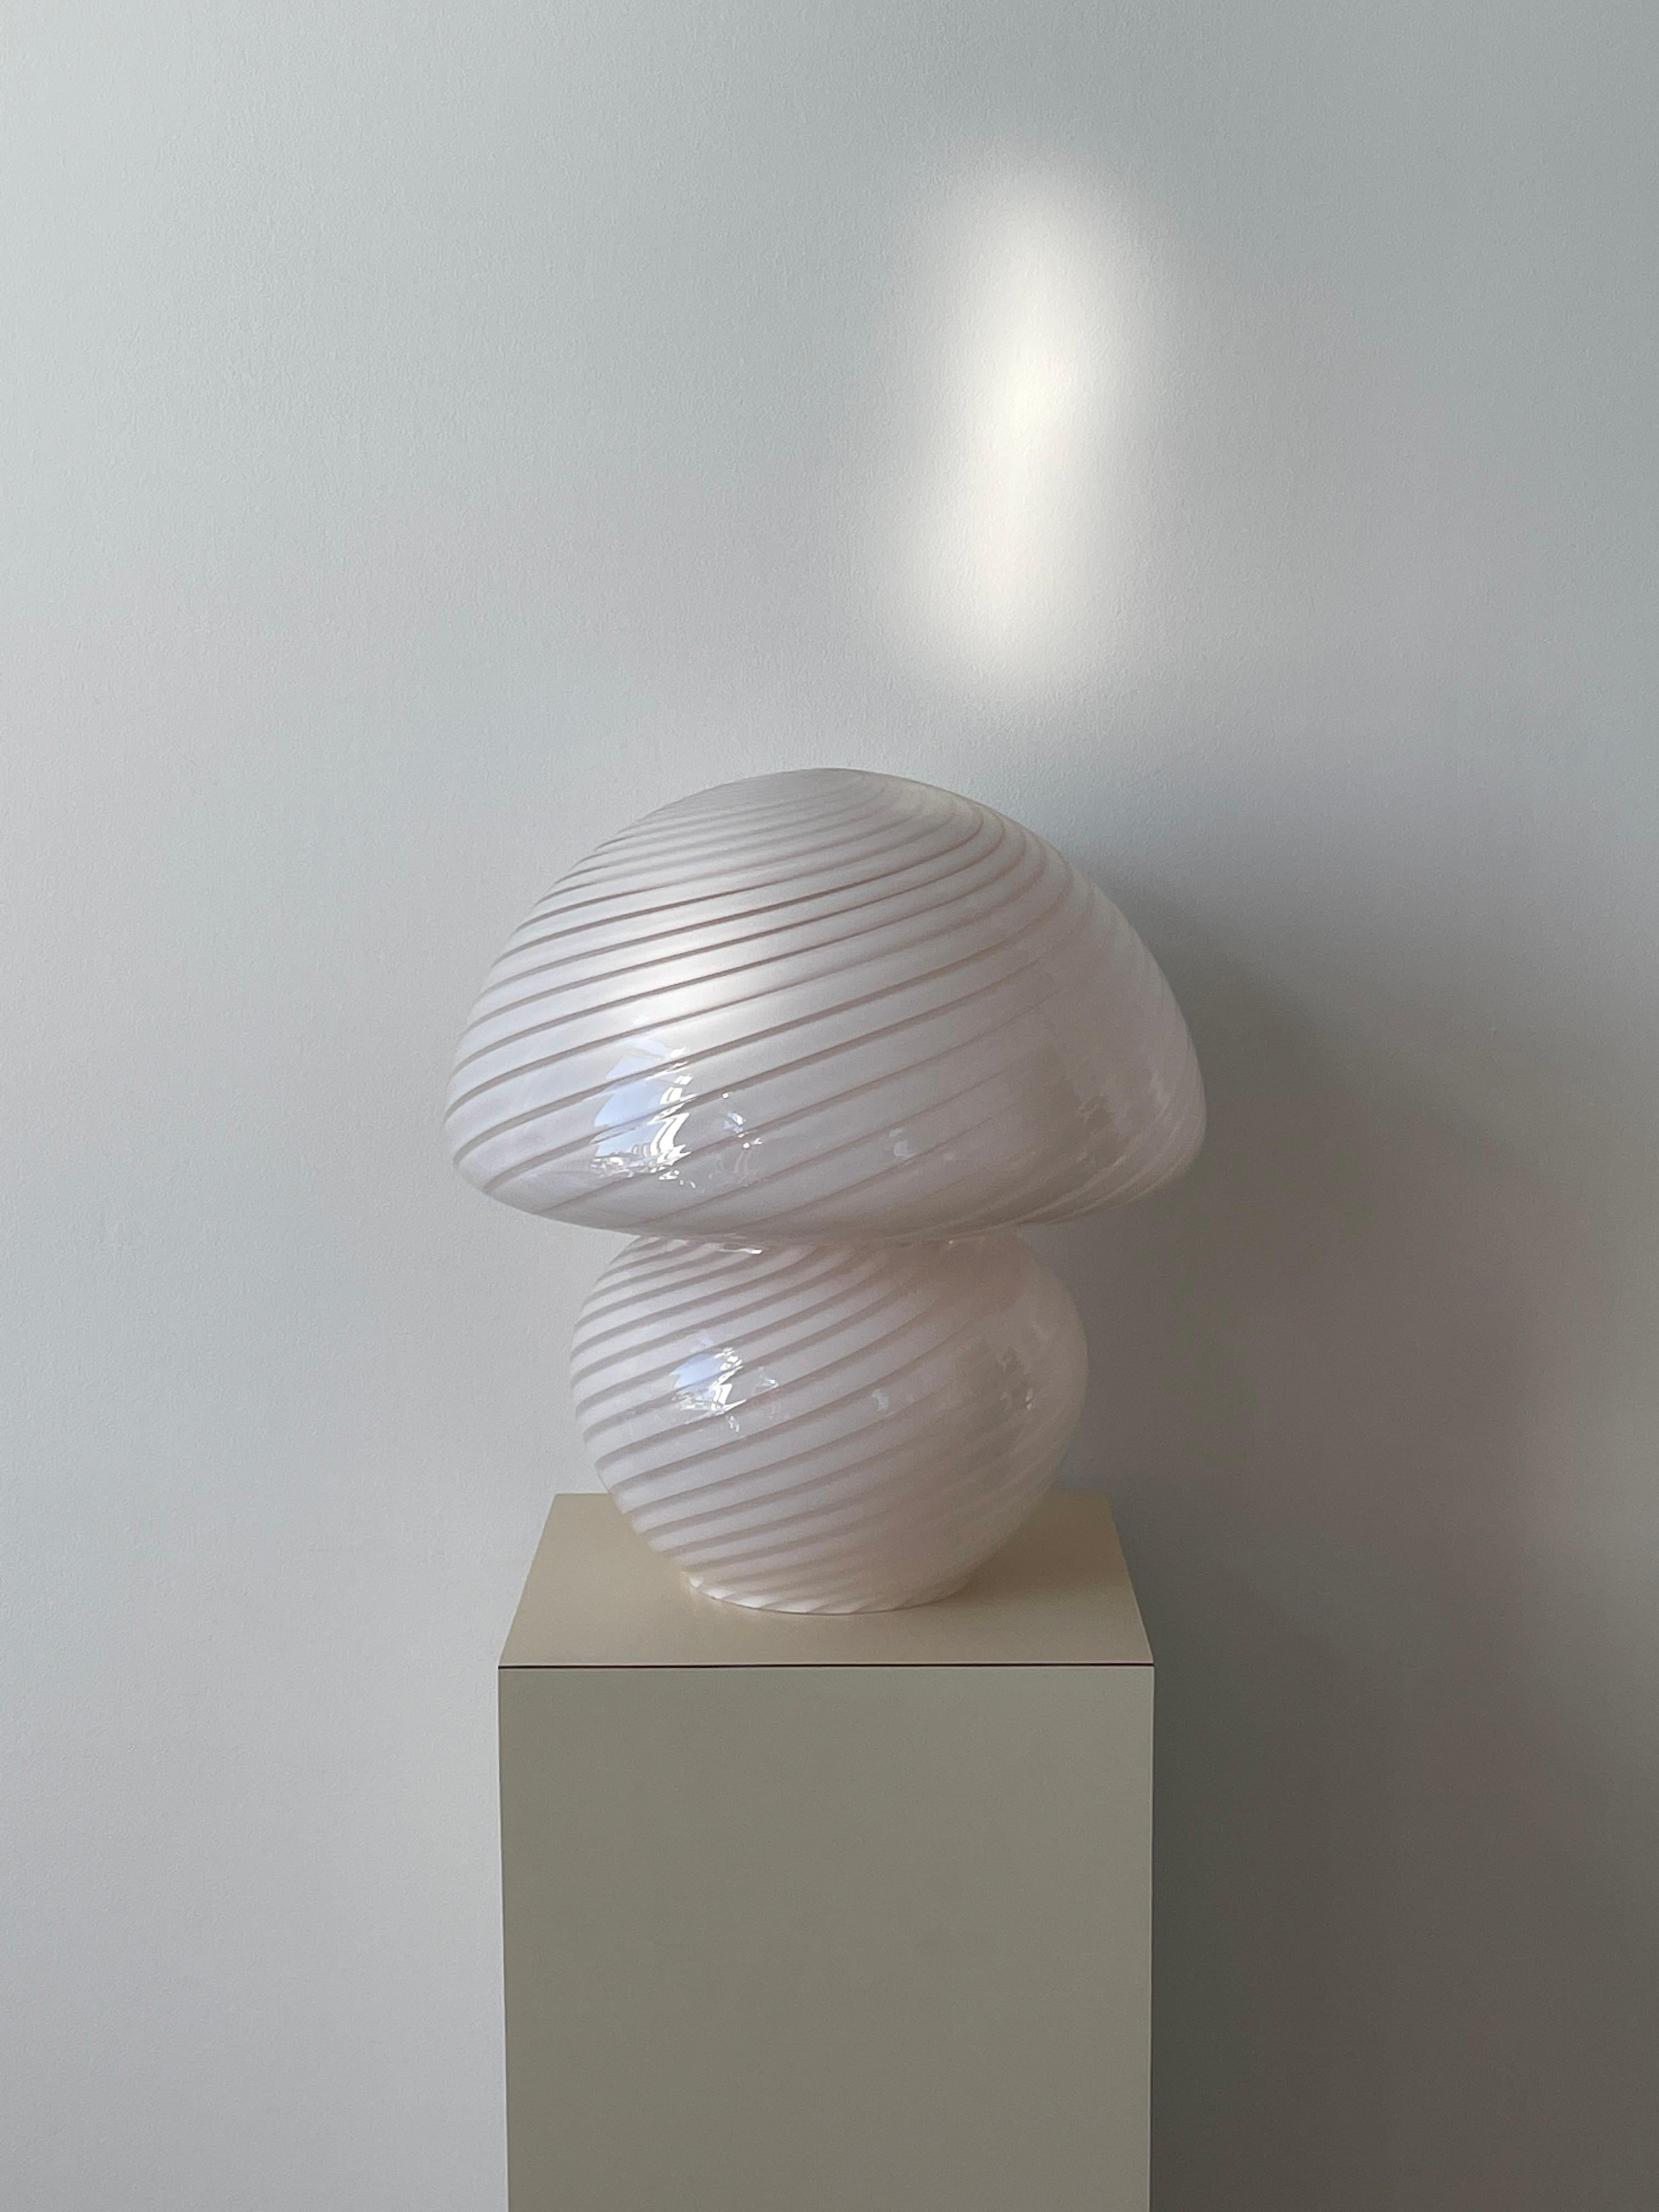 White swirled Murano glass lamp in mushroom form by Vetri. When switched off glass has a faint tint of pink to it. Large rare mushroom shape with a closed top.